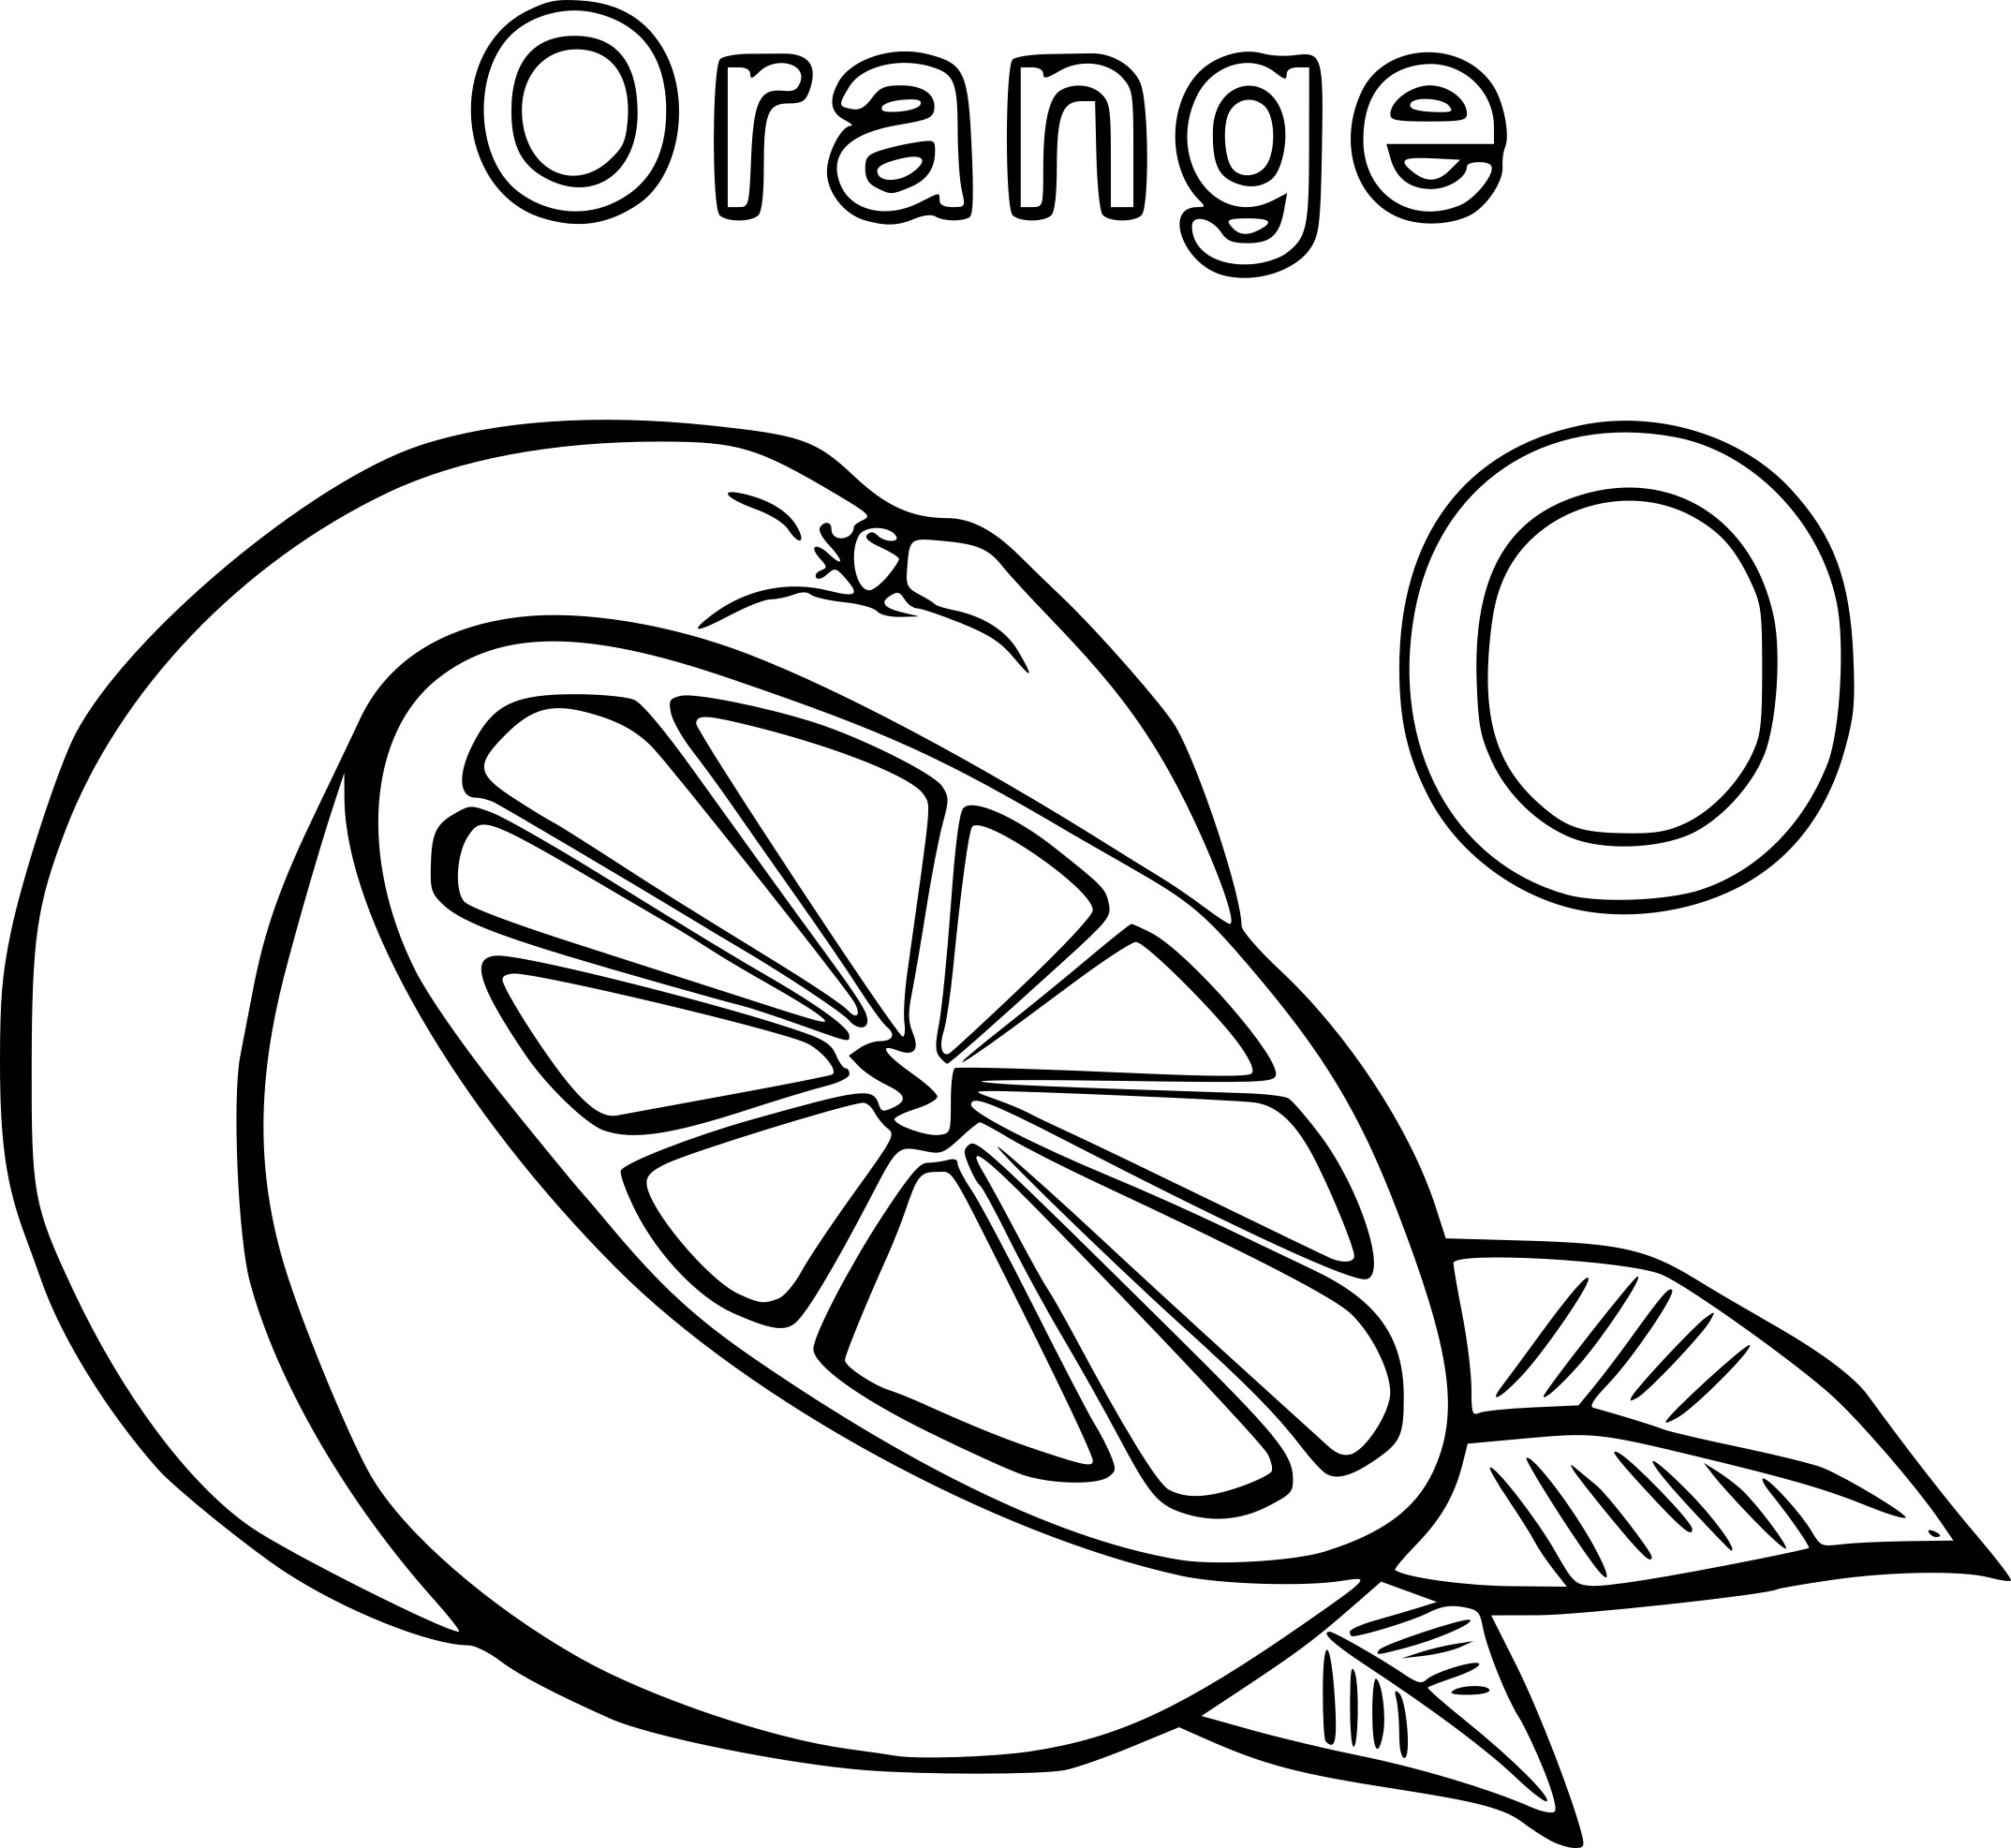 The color orange coloring pages